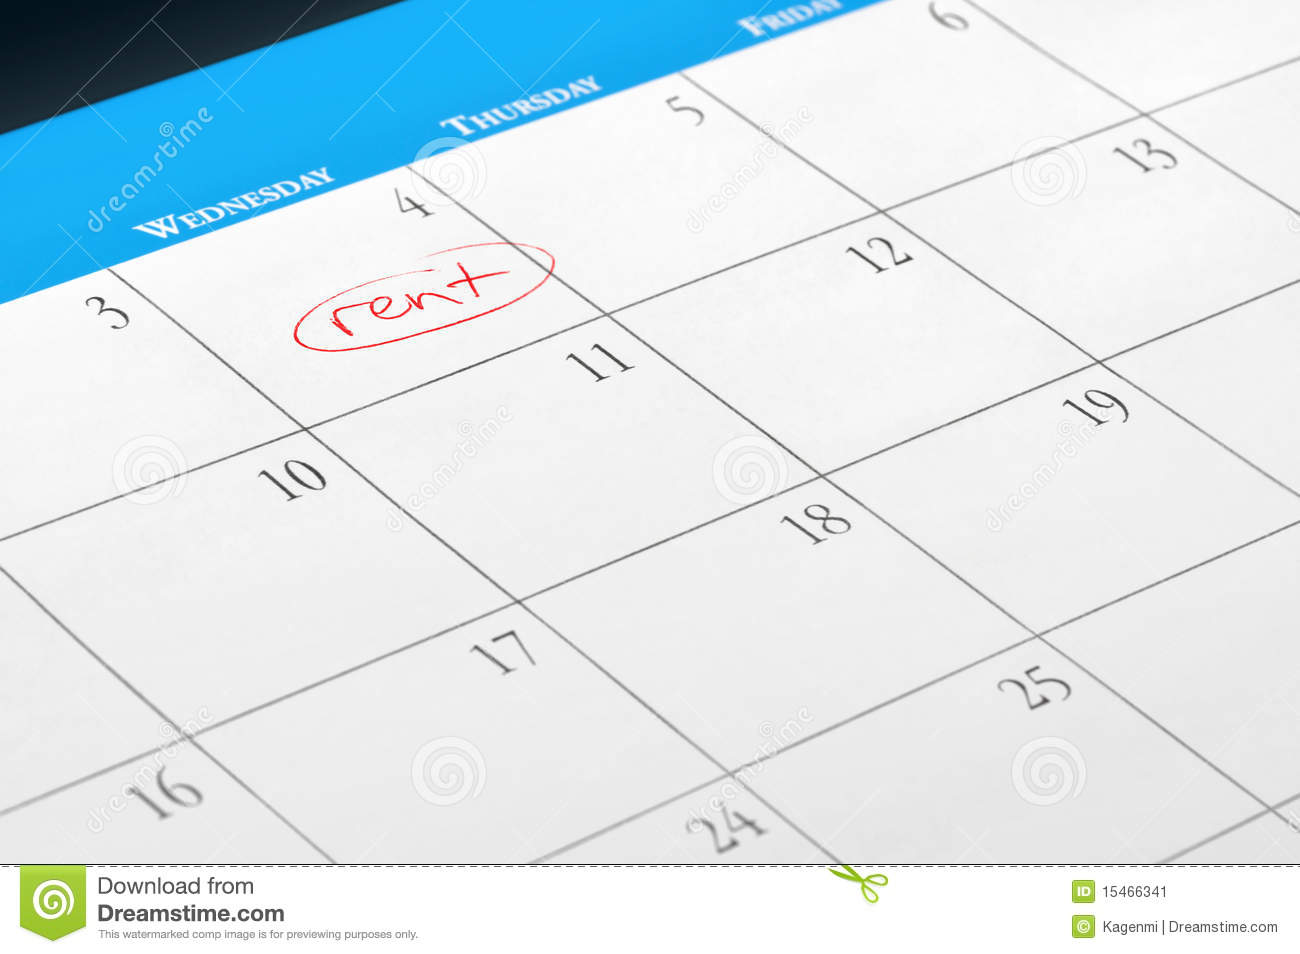 Rent Due Date On Calendar Page Stock Image   Image  15466341